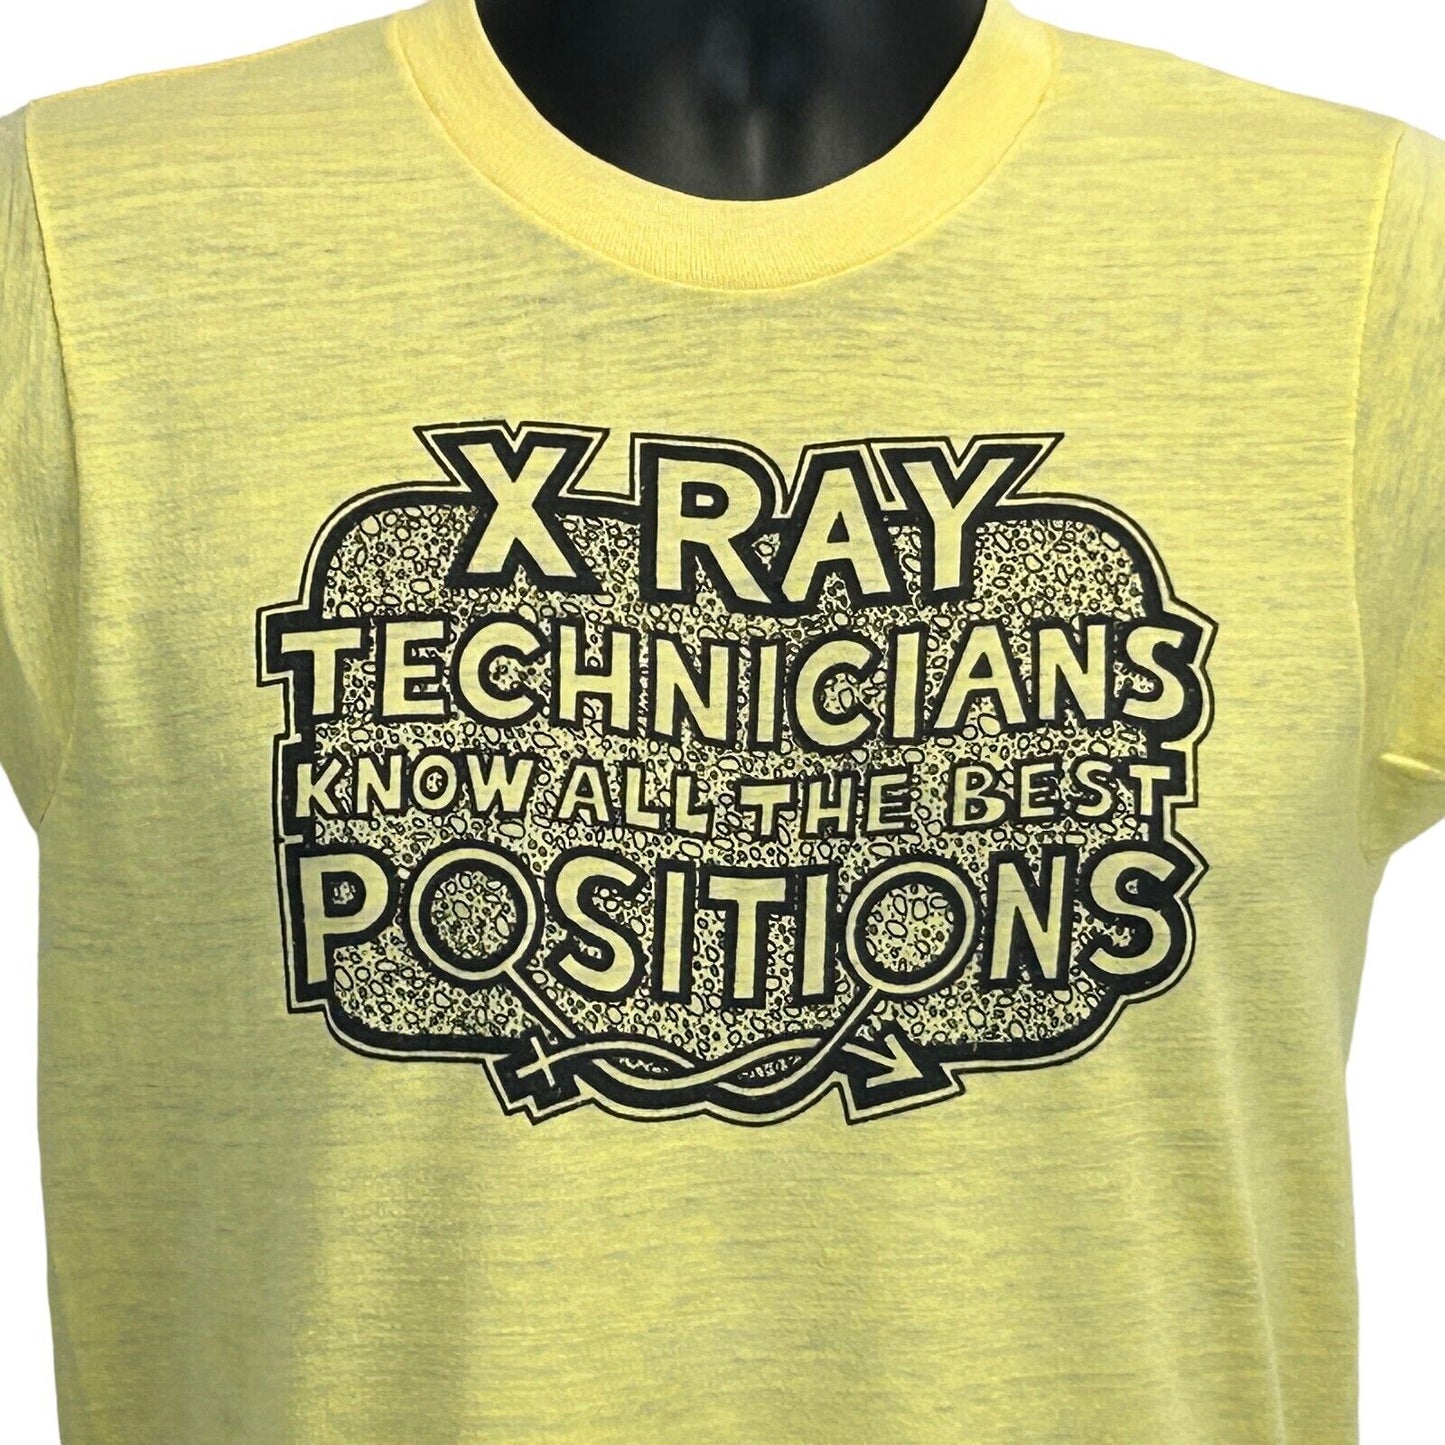 X-Ray Technicians Know All the Positions Vintage 70s T Shirt XS Radiographers